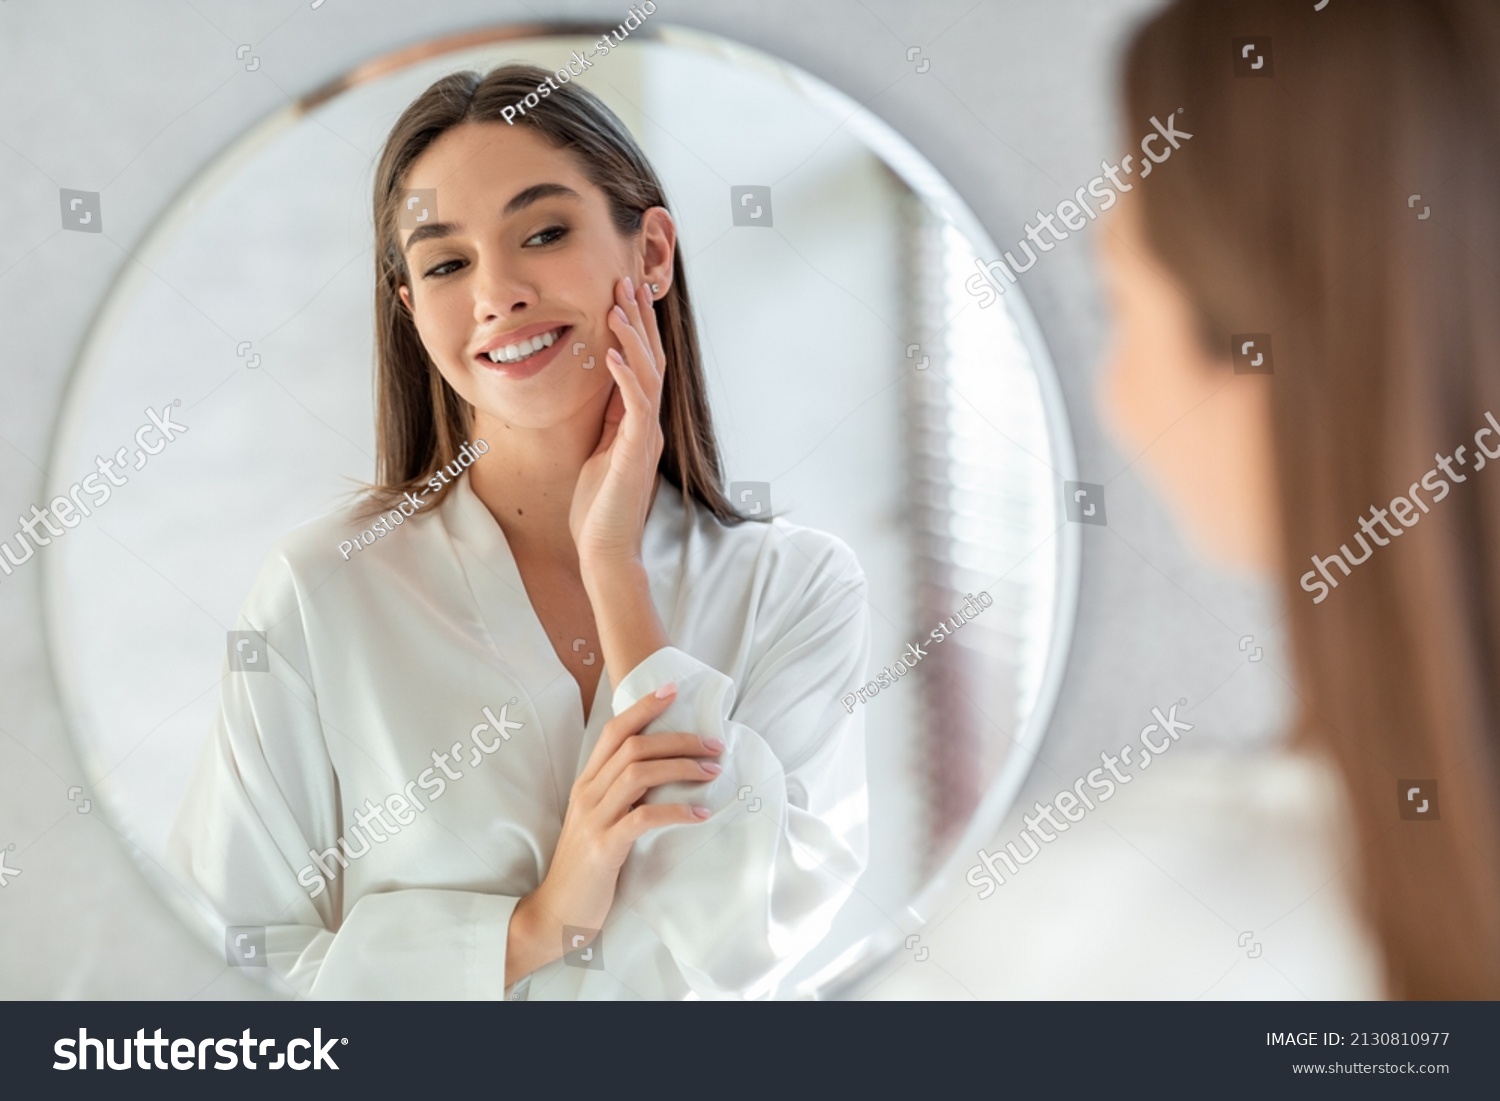 Self-Care Concept. Portrait Of Attractive Young Female Looking At Mirror, Beautiful Woman Wearing White Silk Robe Touching Soft Skin On Face And Smiling, Enjoying Her Reflection, Selective Focus #2130810977